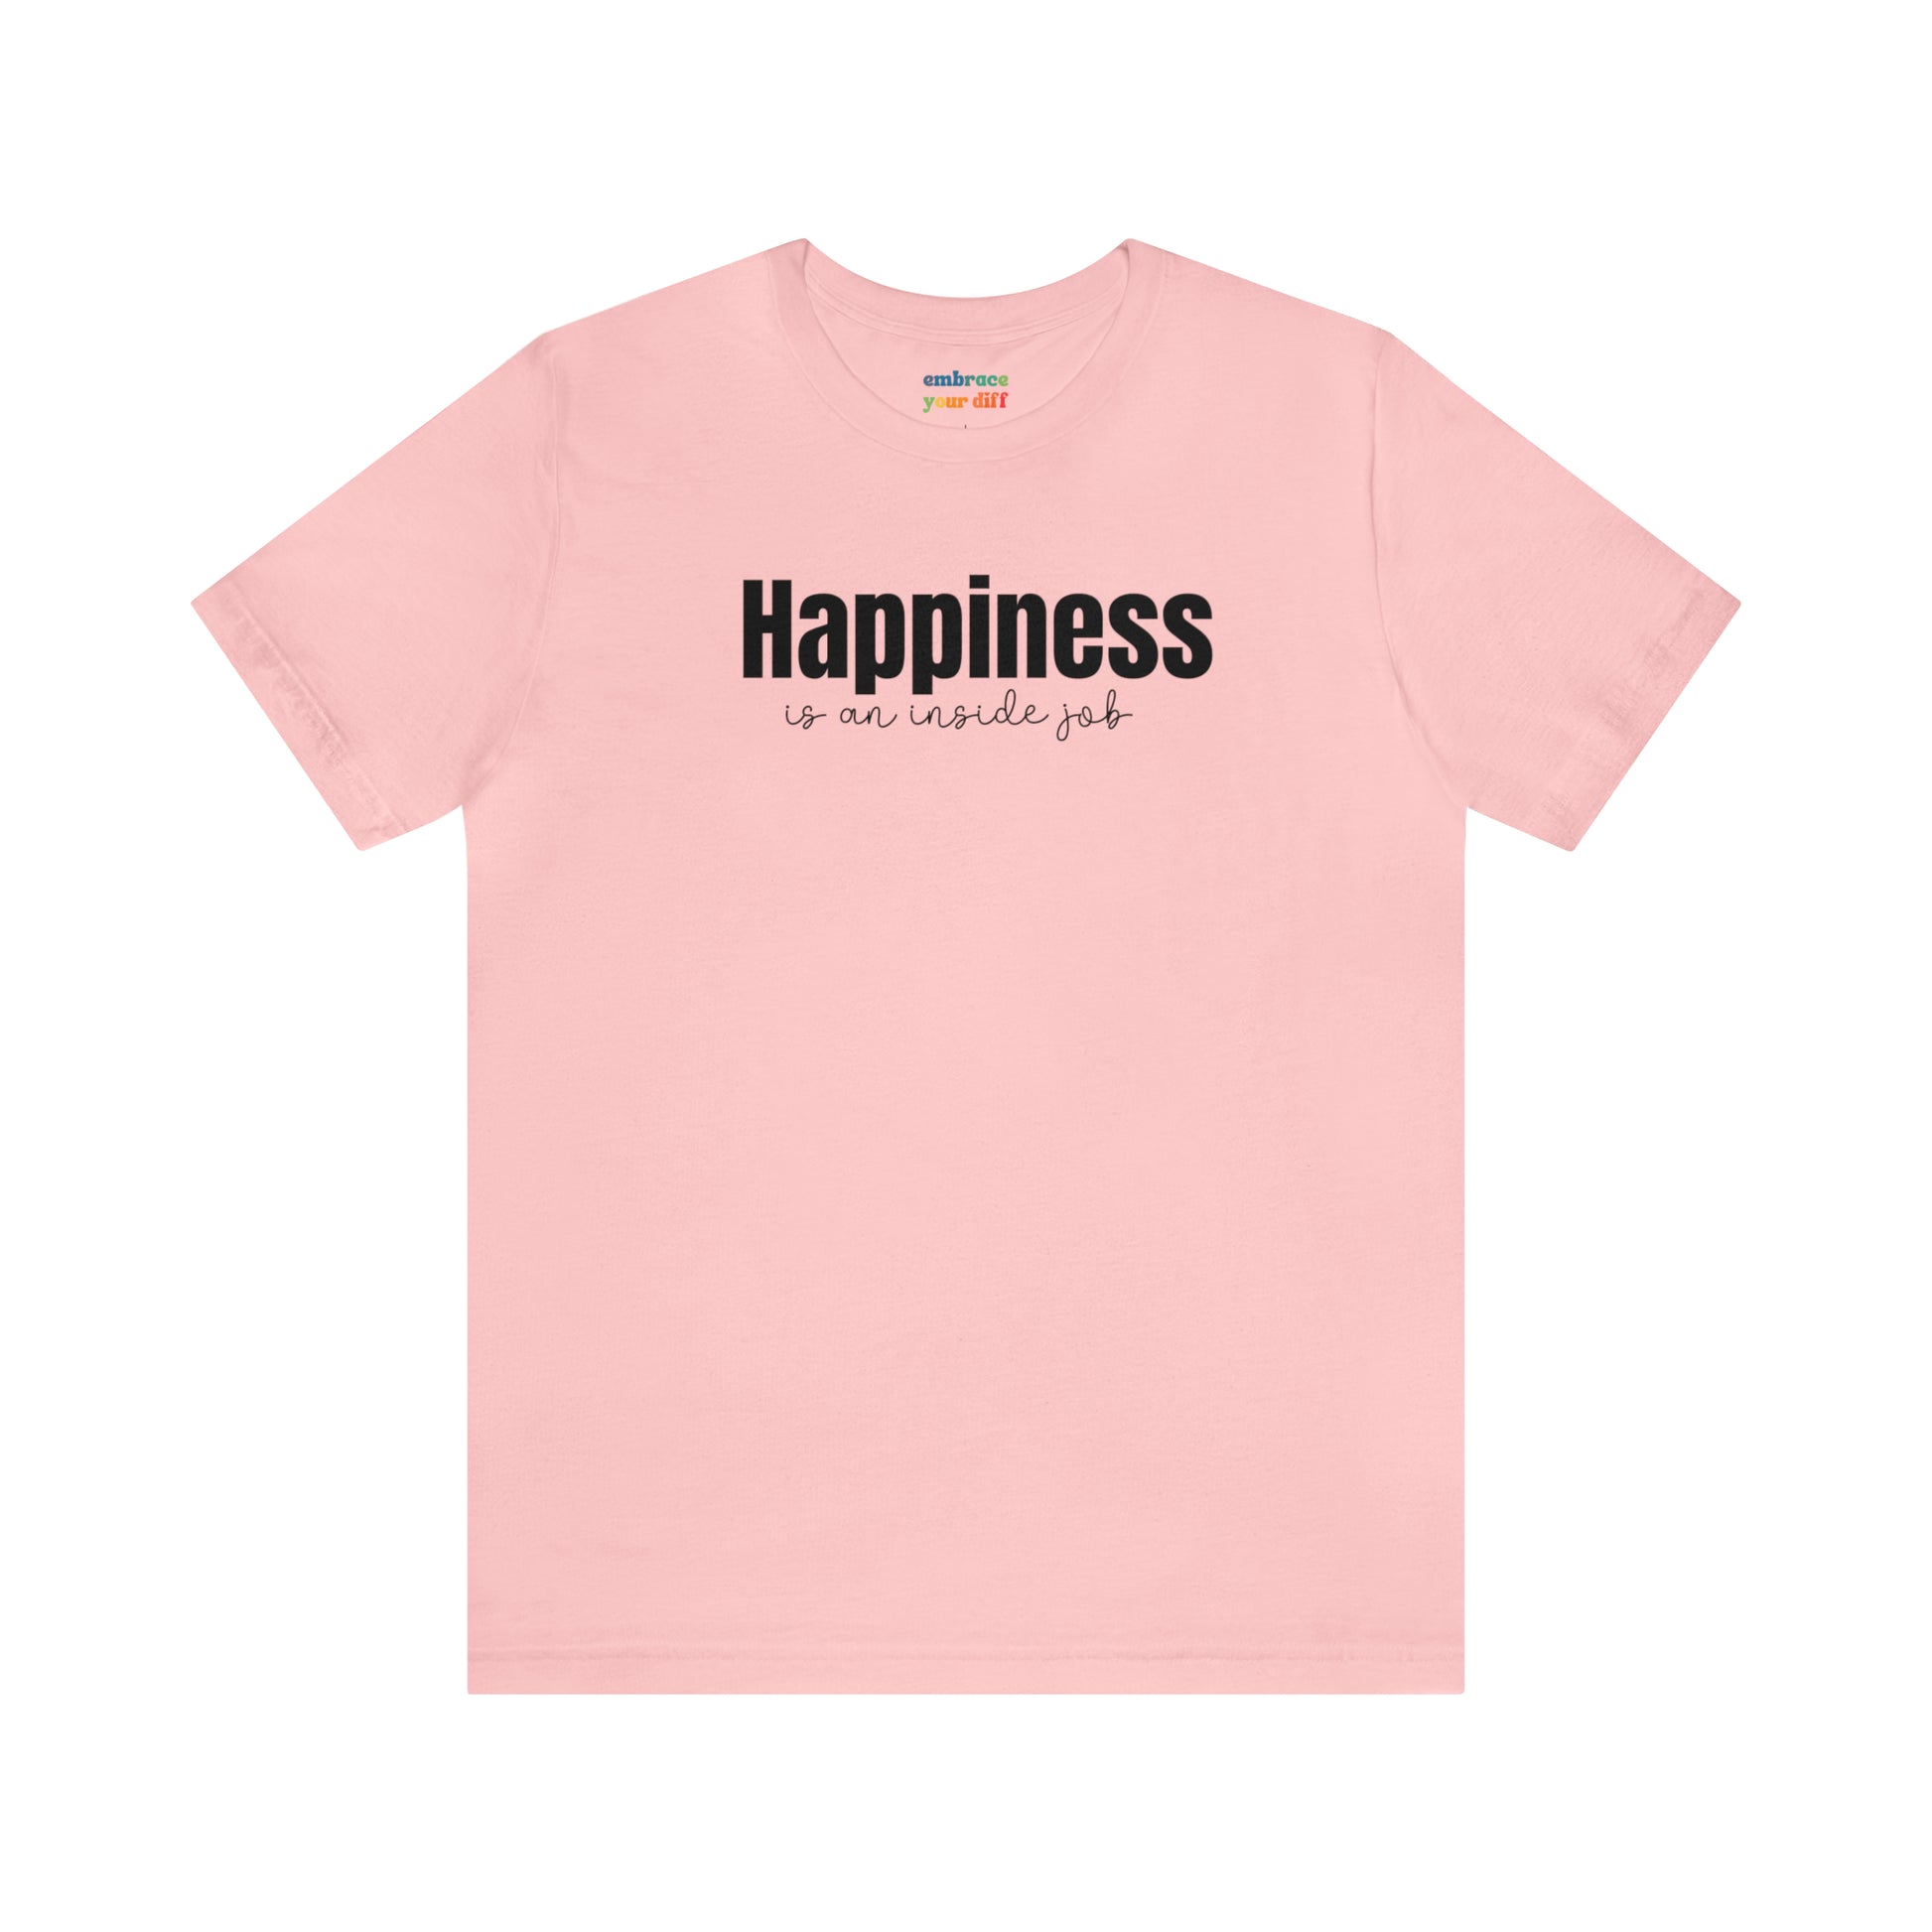 Happiness Adult Shirt for Self Love - Embrace Your Diff